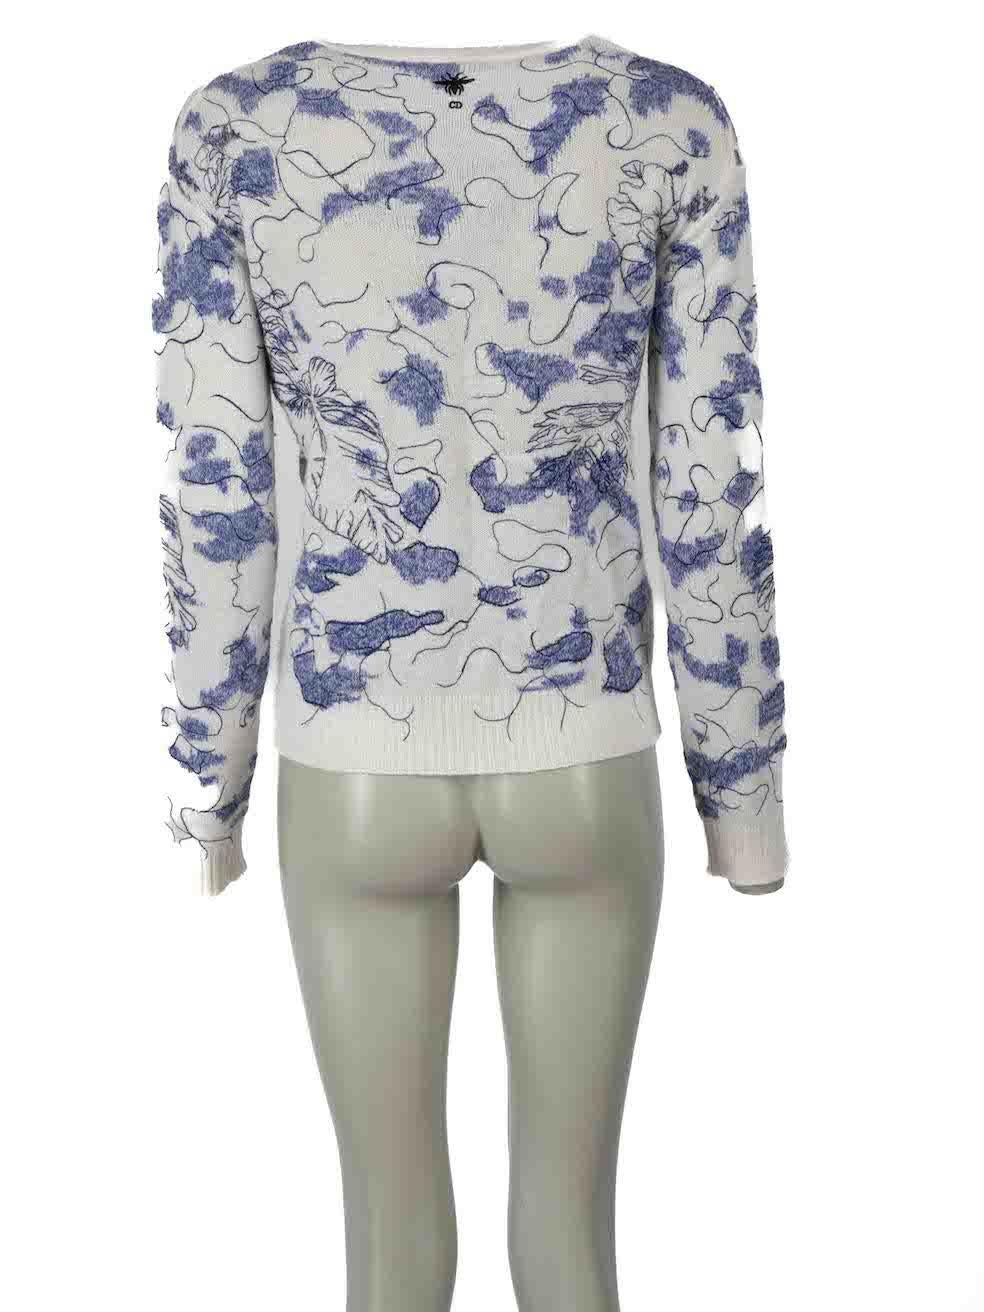 Dior Blue Cashmere Toile De Jouy Jumper Size S In Good Condition For Sale In London, GB